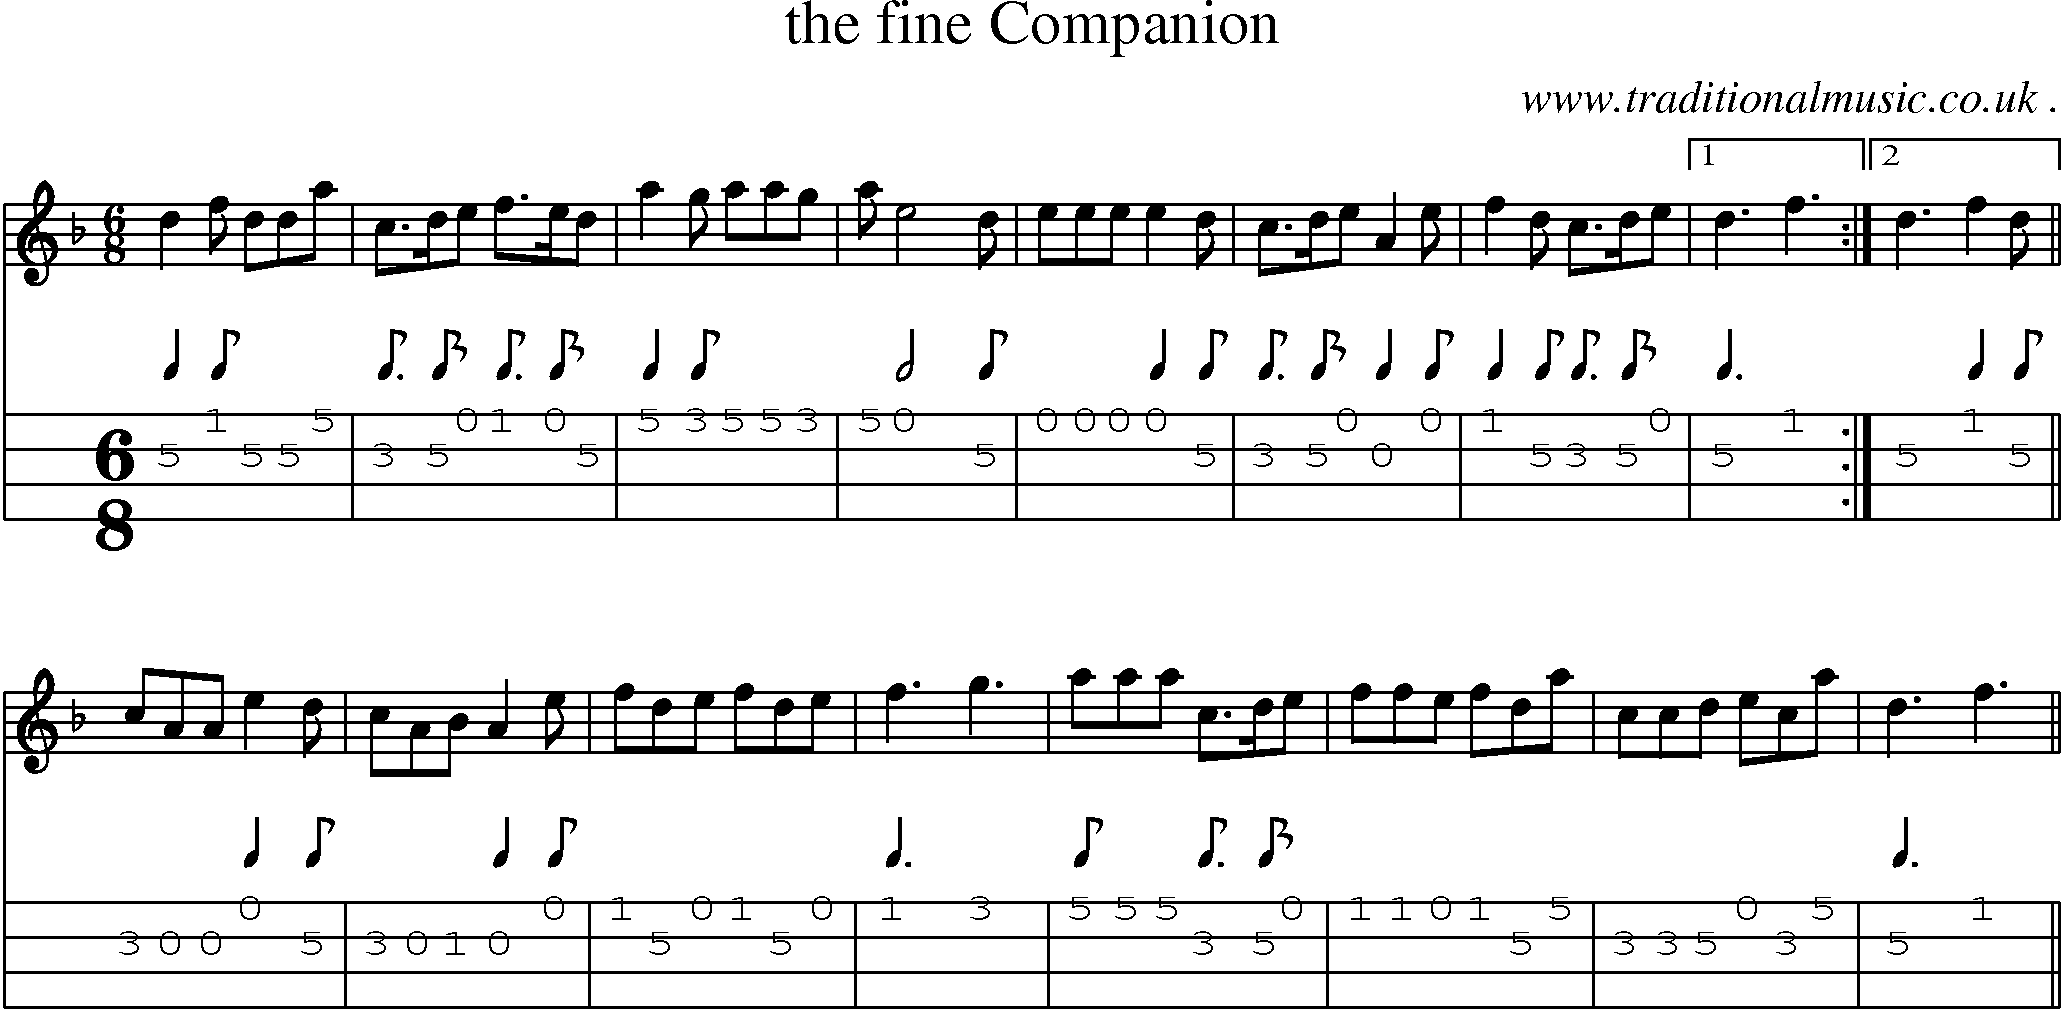 Sheet-music  score, Chords and Mandolin Tabs for The Fine Companion